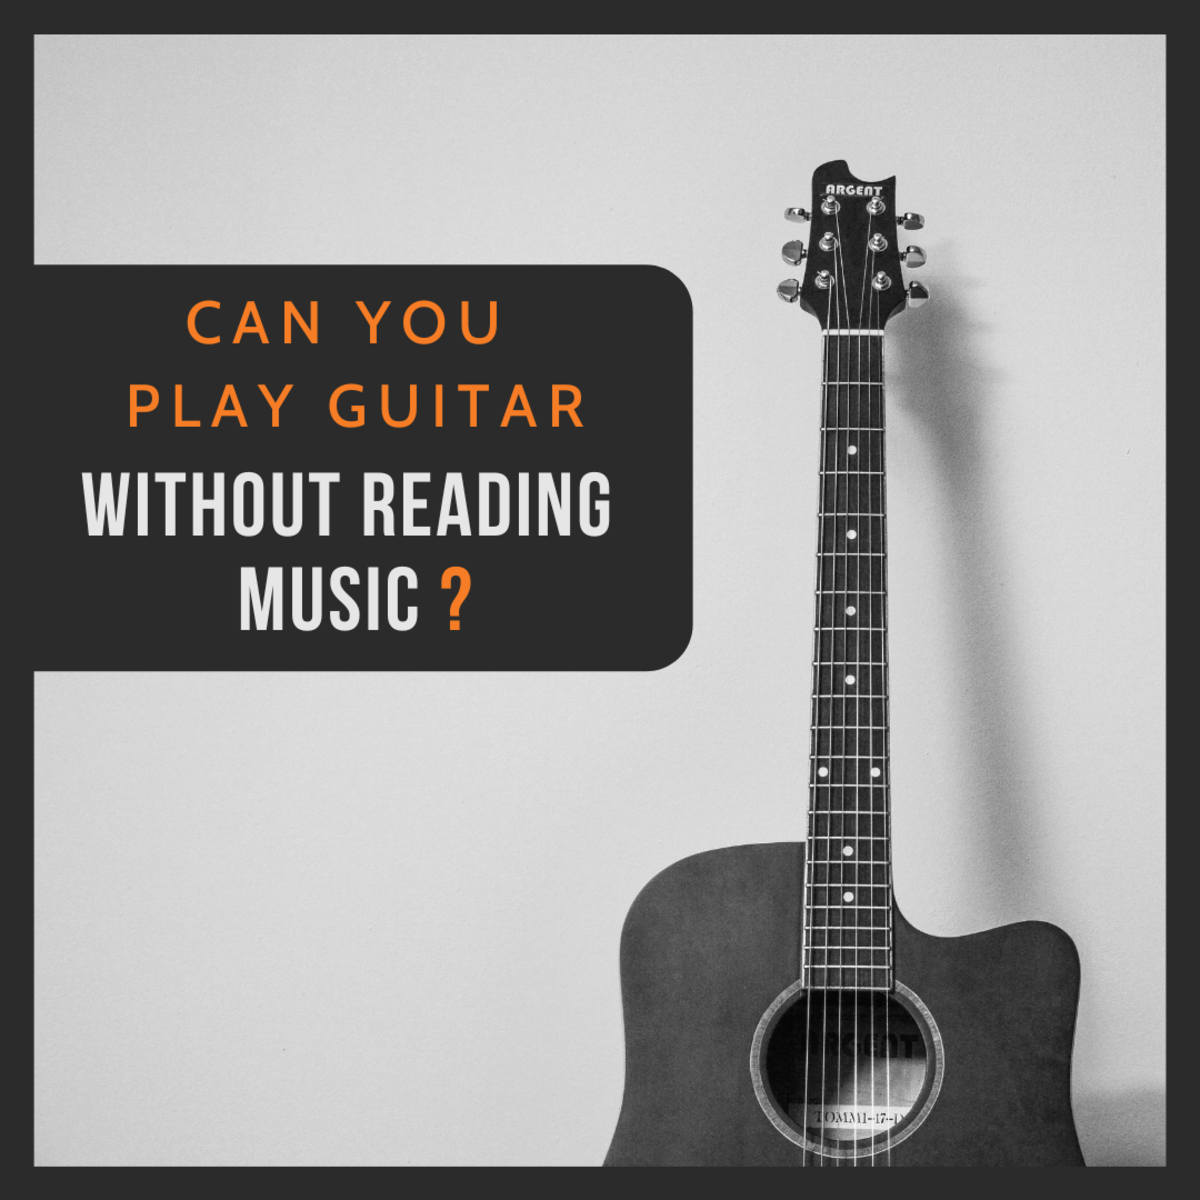 Do You Have to Learn to Read Music to Play Guitar?